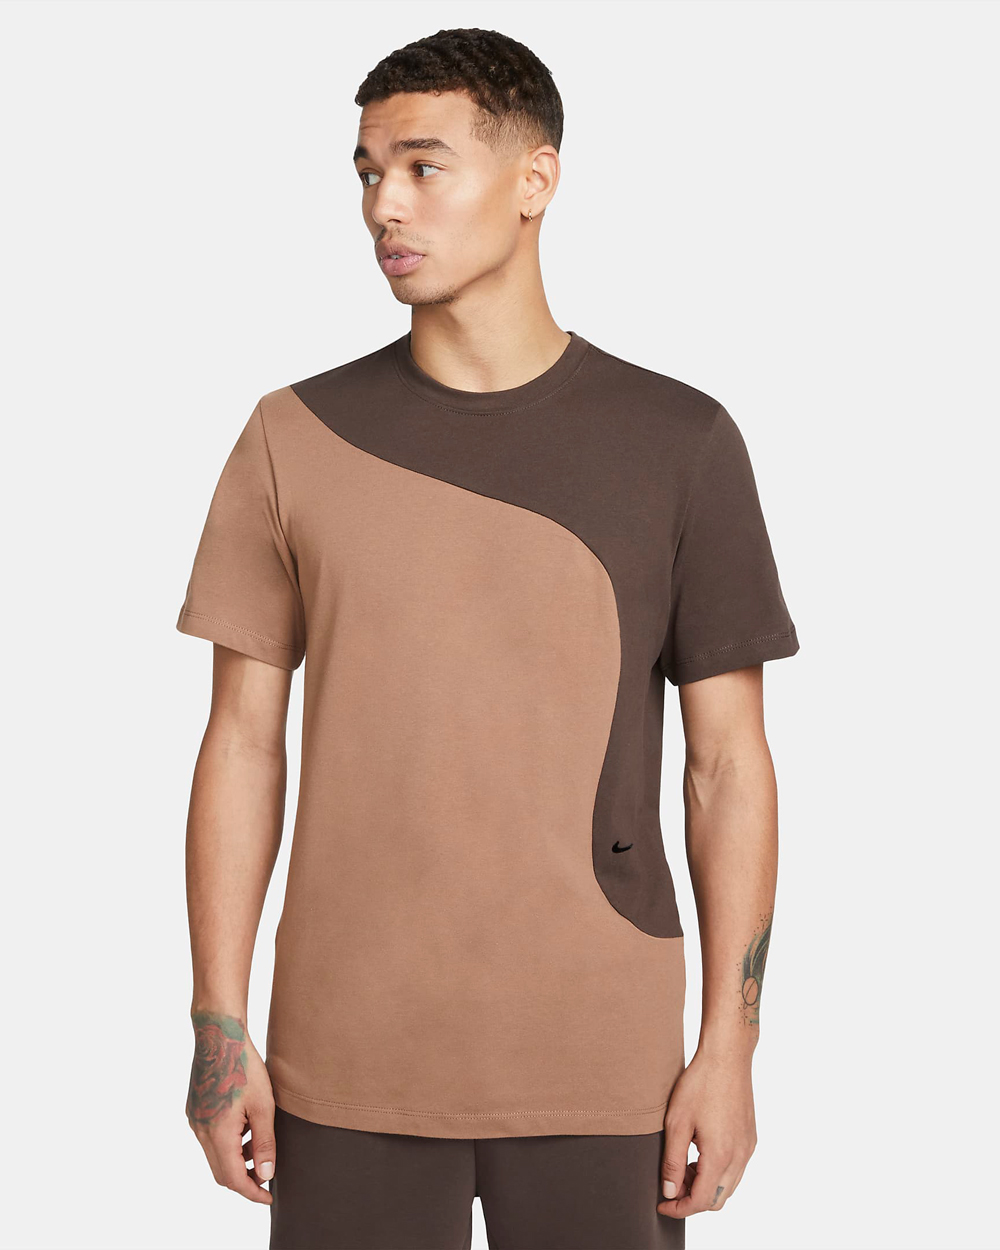 nike-sportswear-color-clash-t-shirt-archaeo-brown-baroque-brown-1